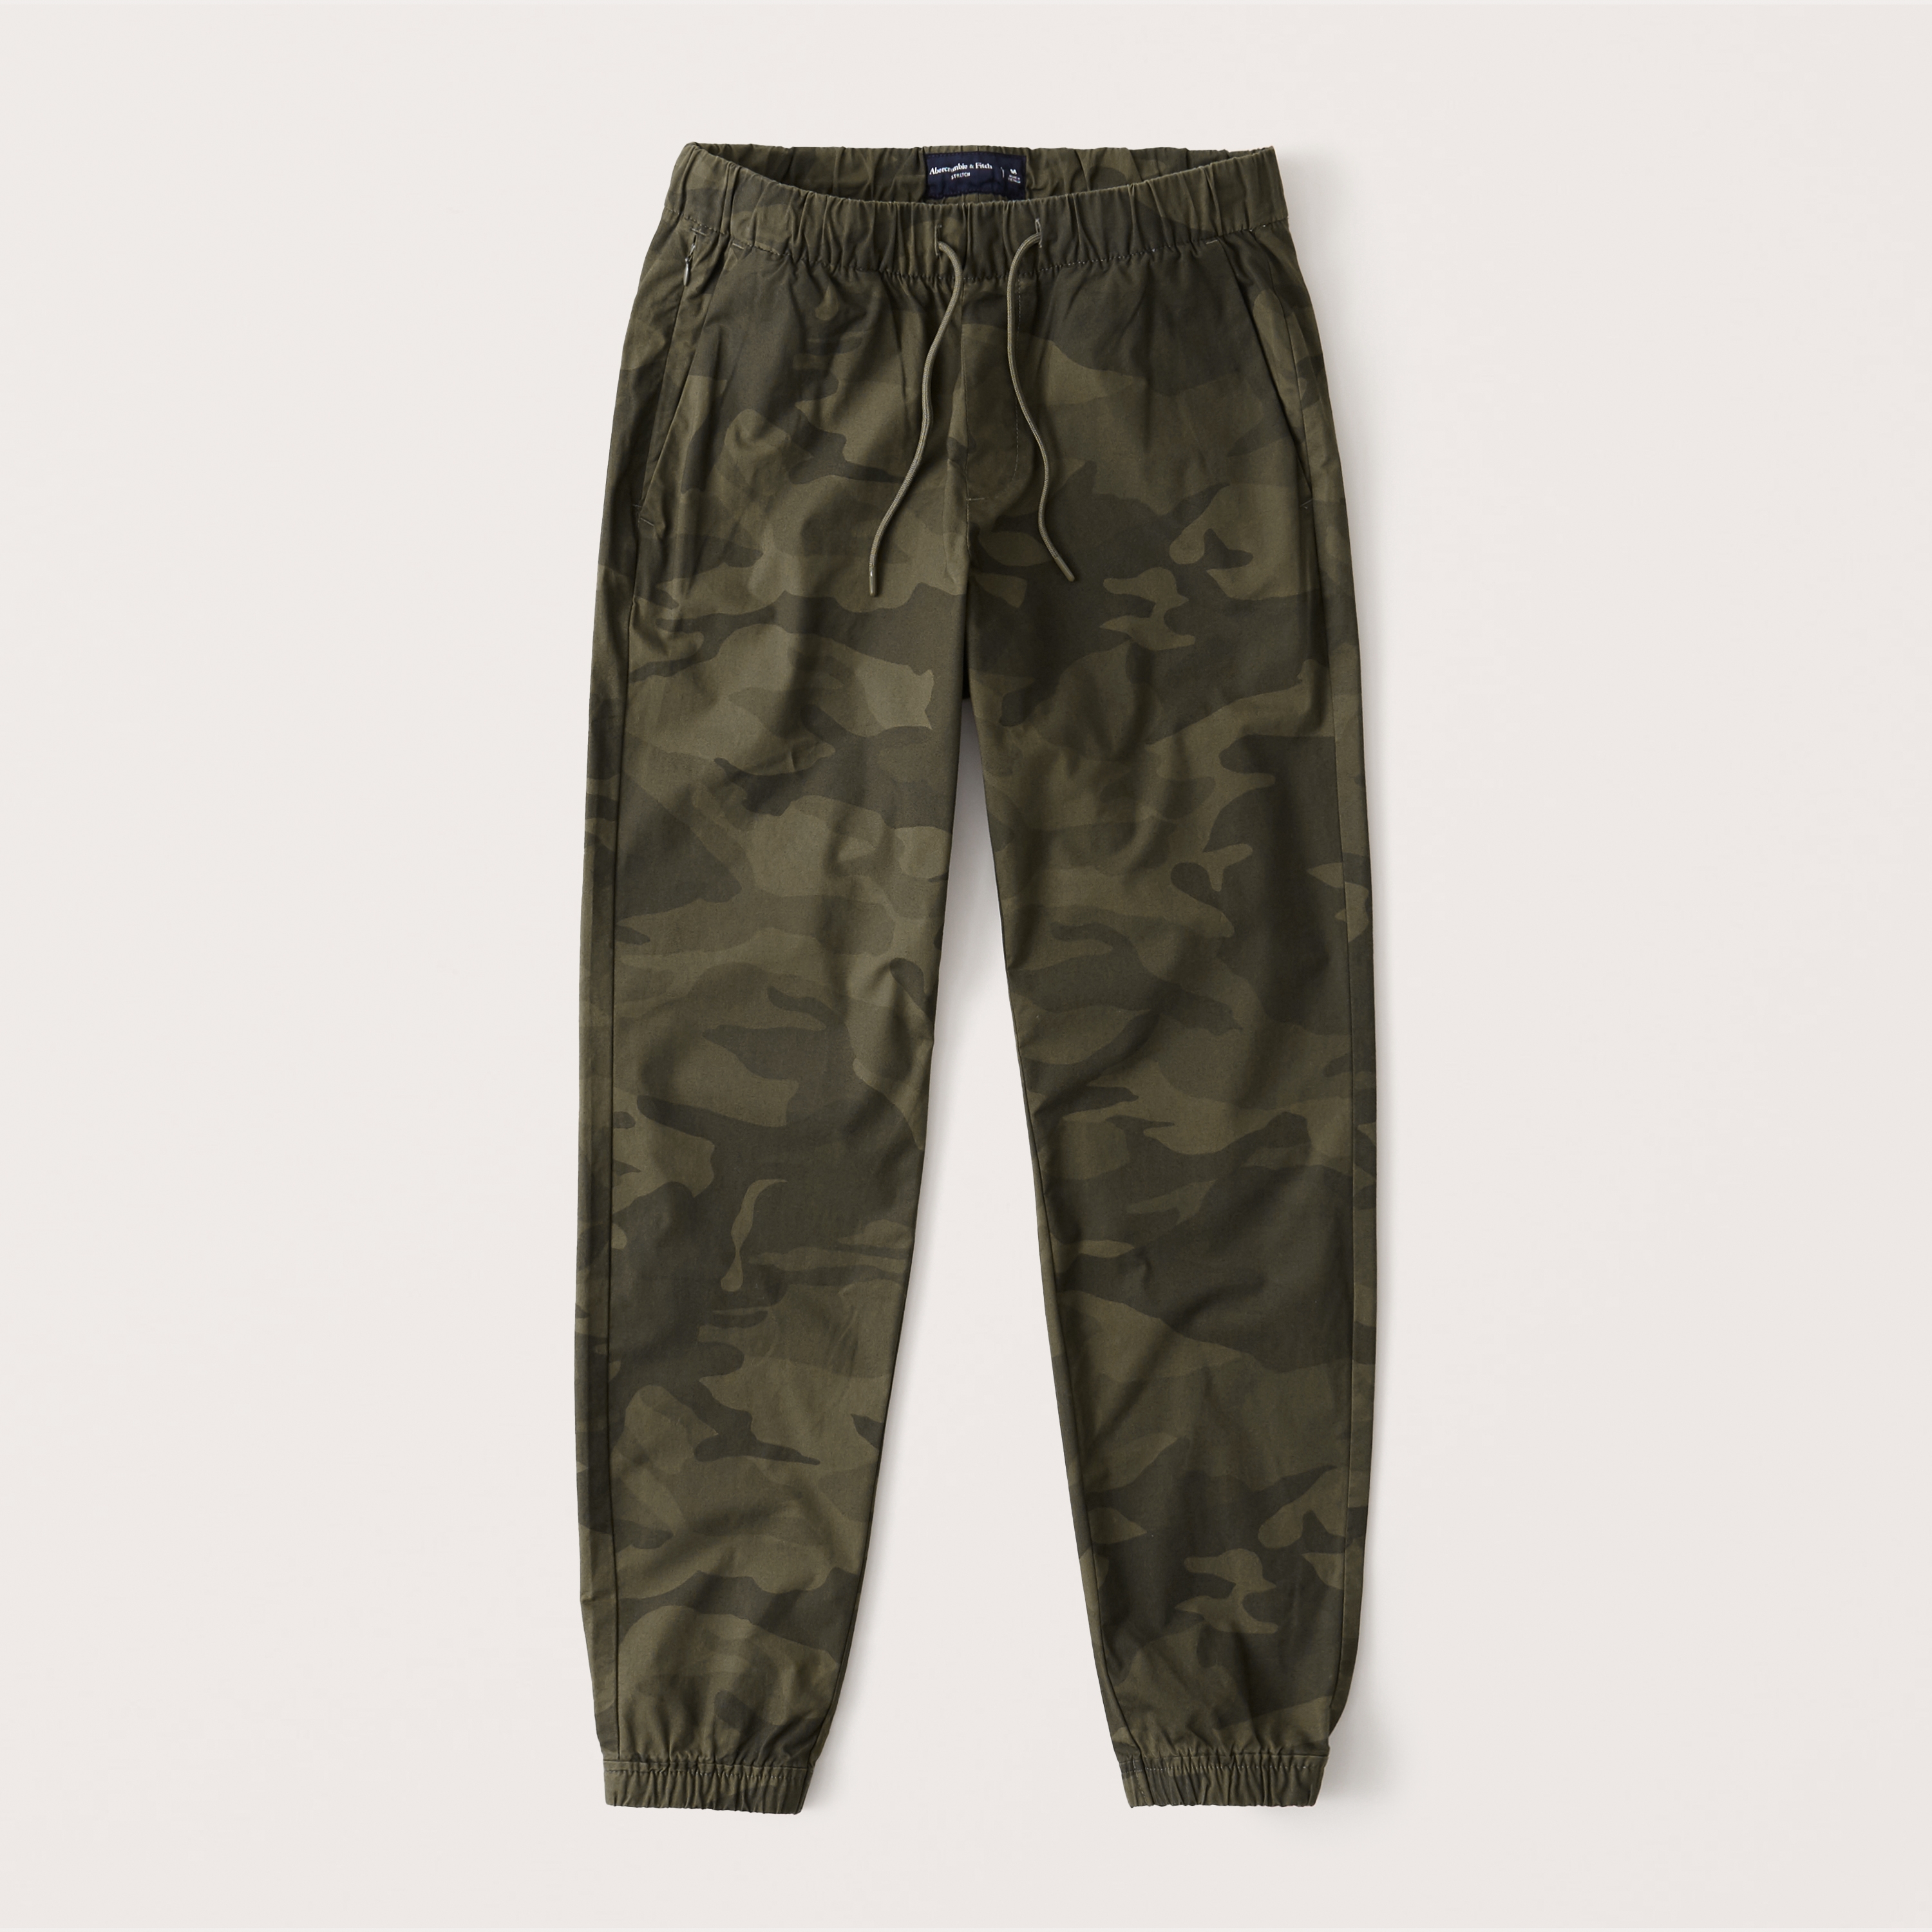 abercrombie & fitch camouflage pants